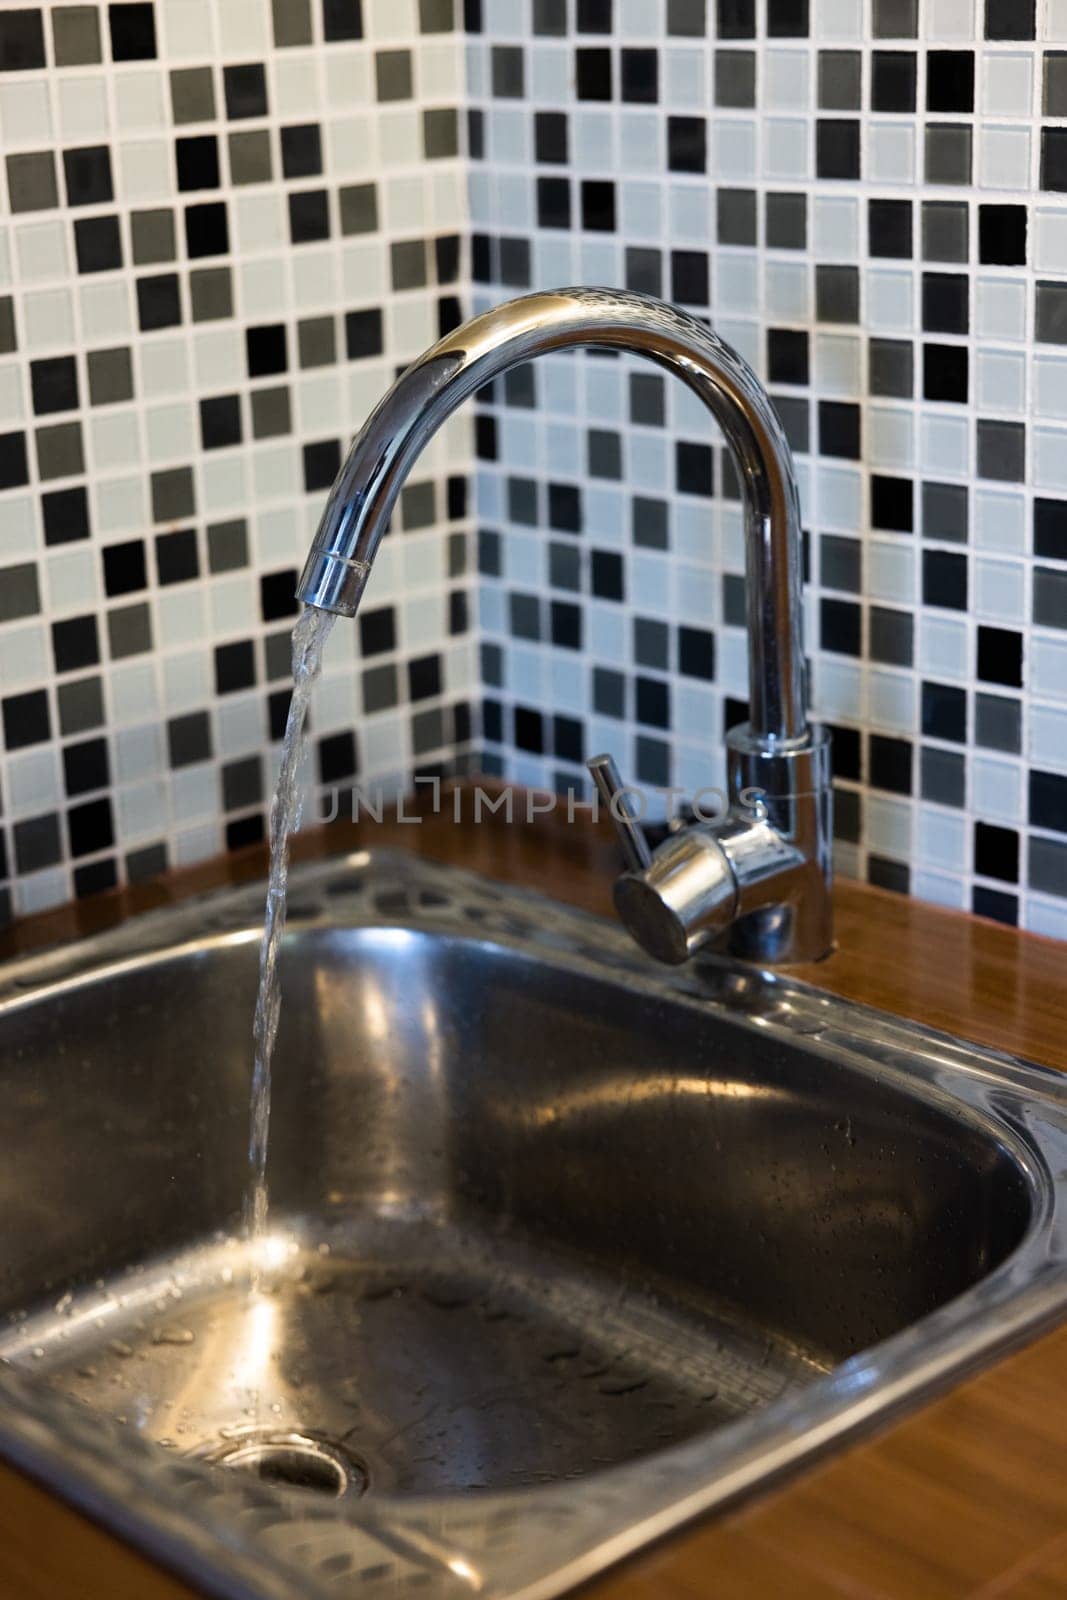 Clean sink with pouring water in the kitchen, metal faucet and sink in an old home interior. by SHOTPRIME